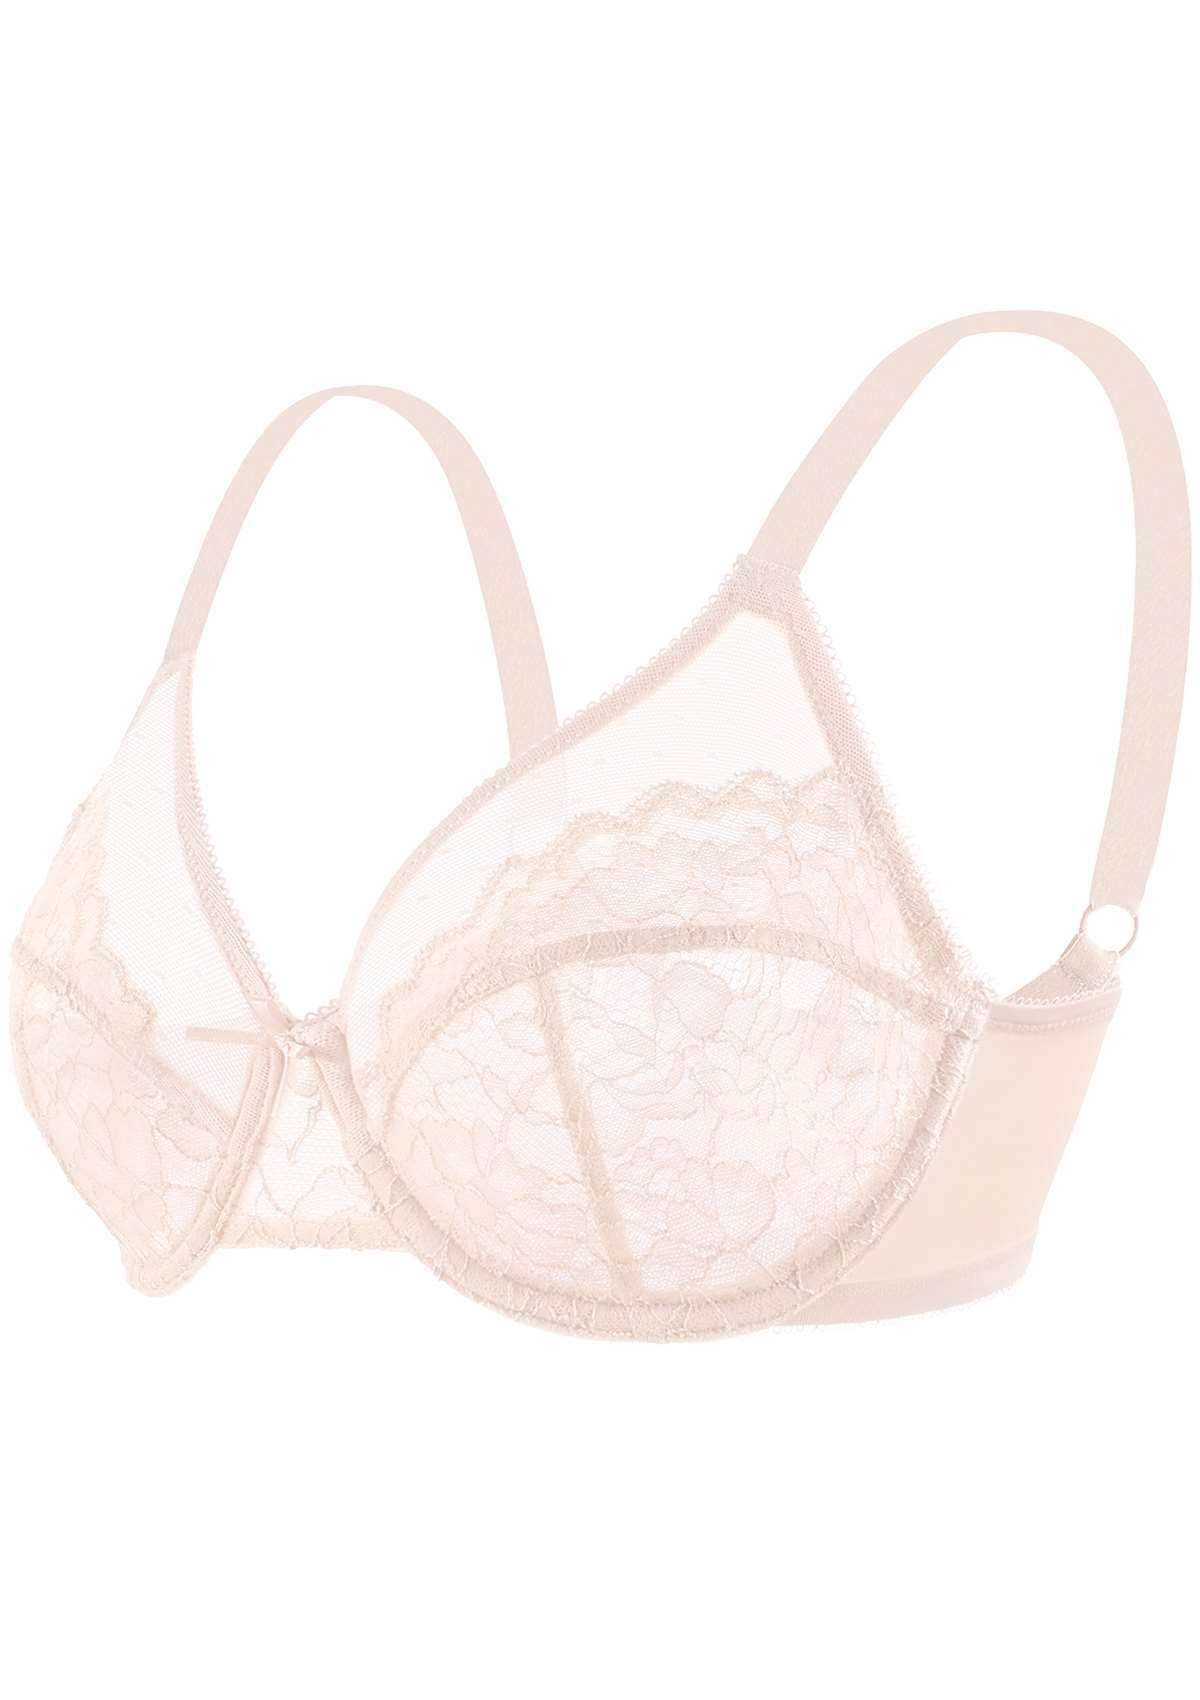 HSIA Enchante Lacy Bra: Comfy Sheer Lace Bra With Lift - Pink / 36 / G